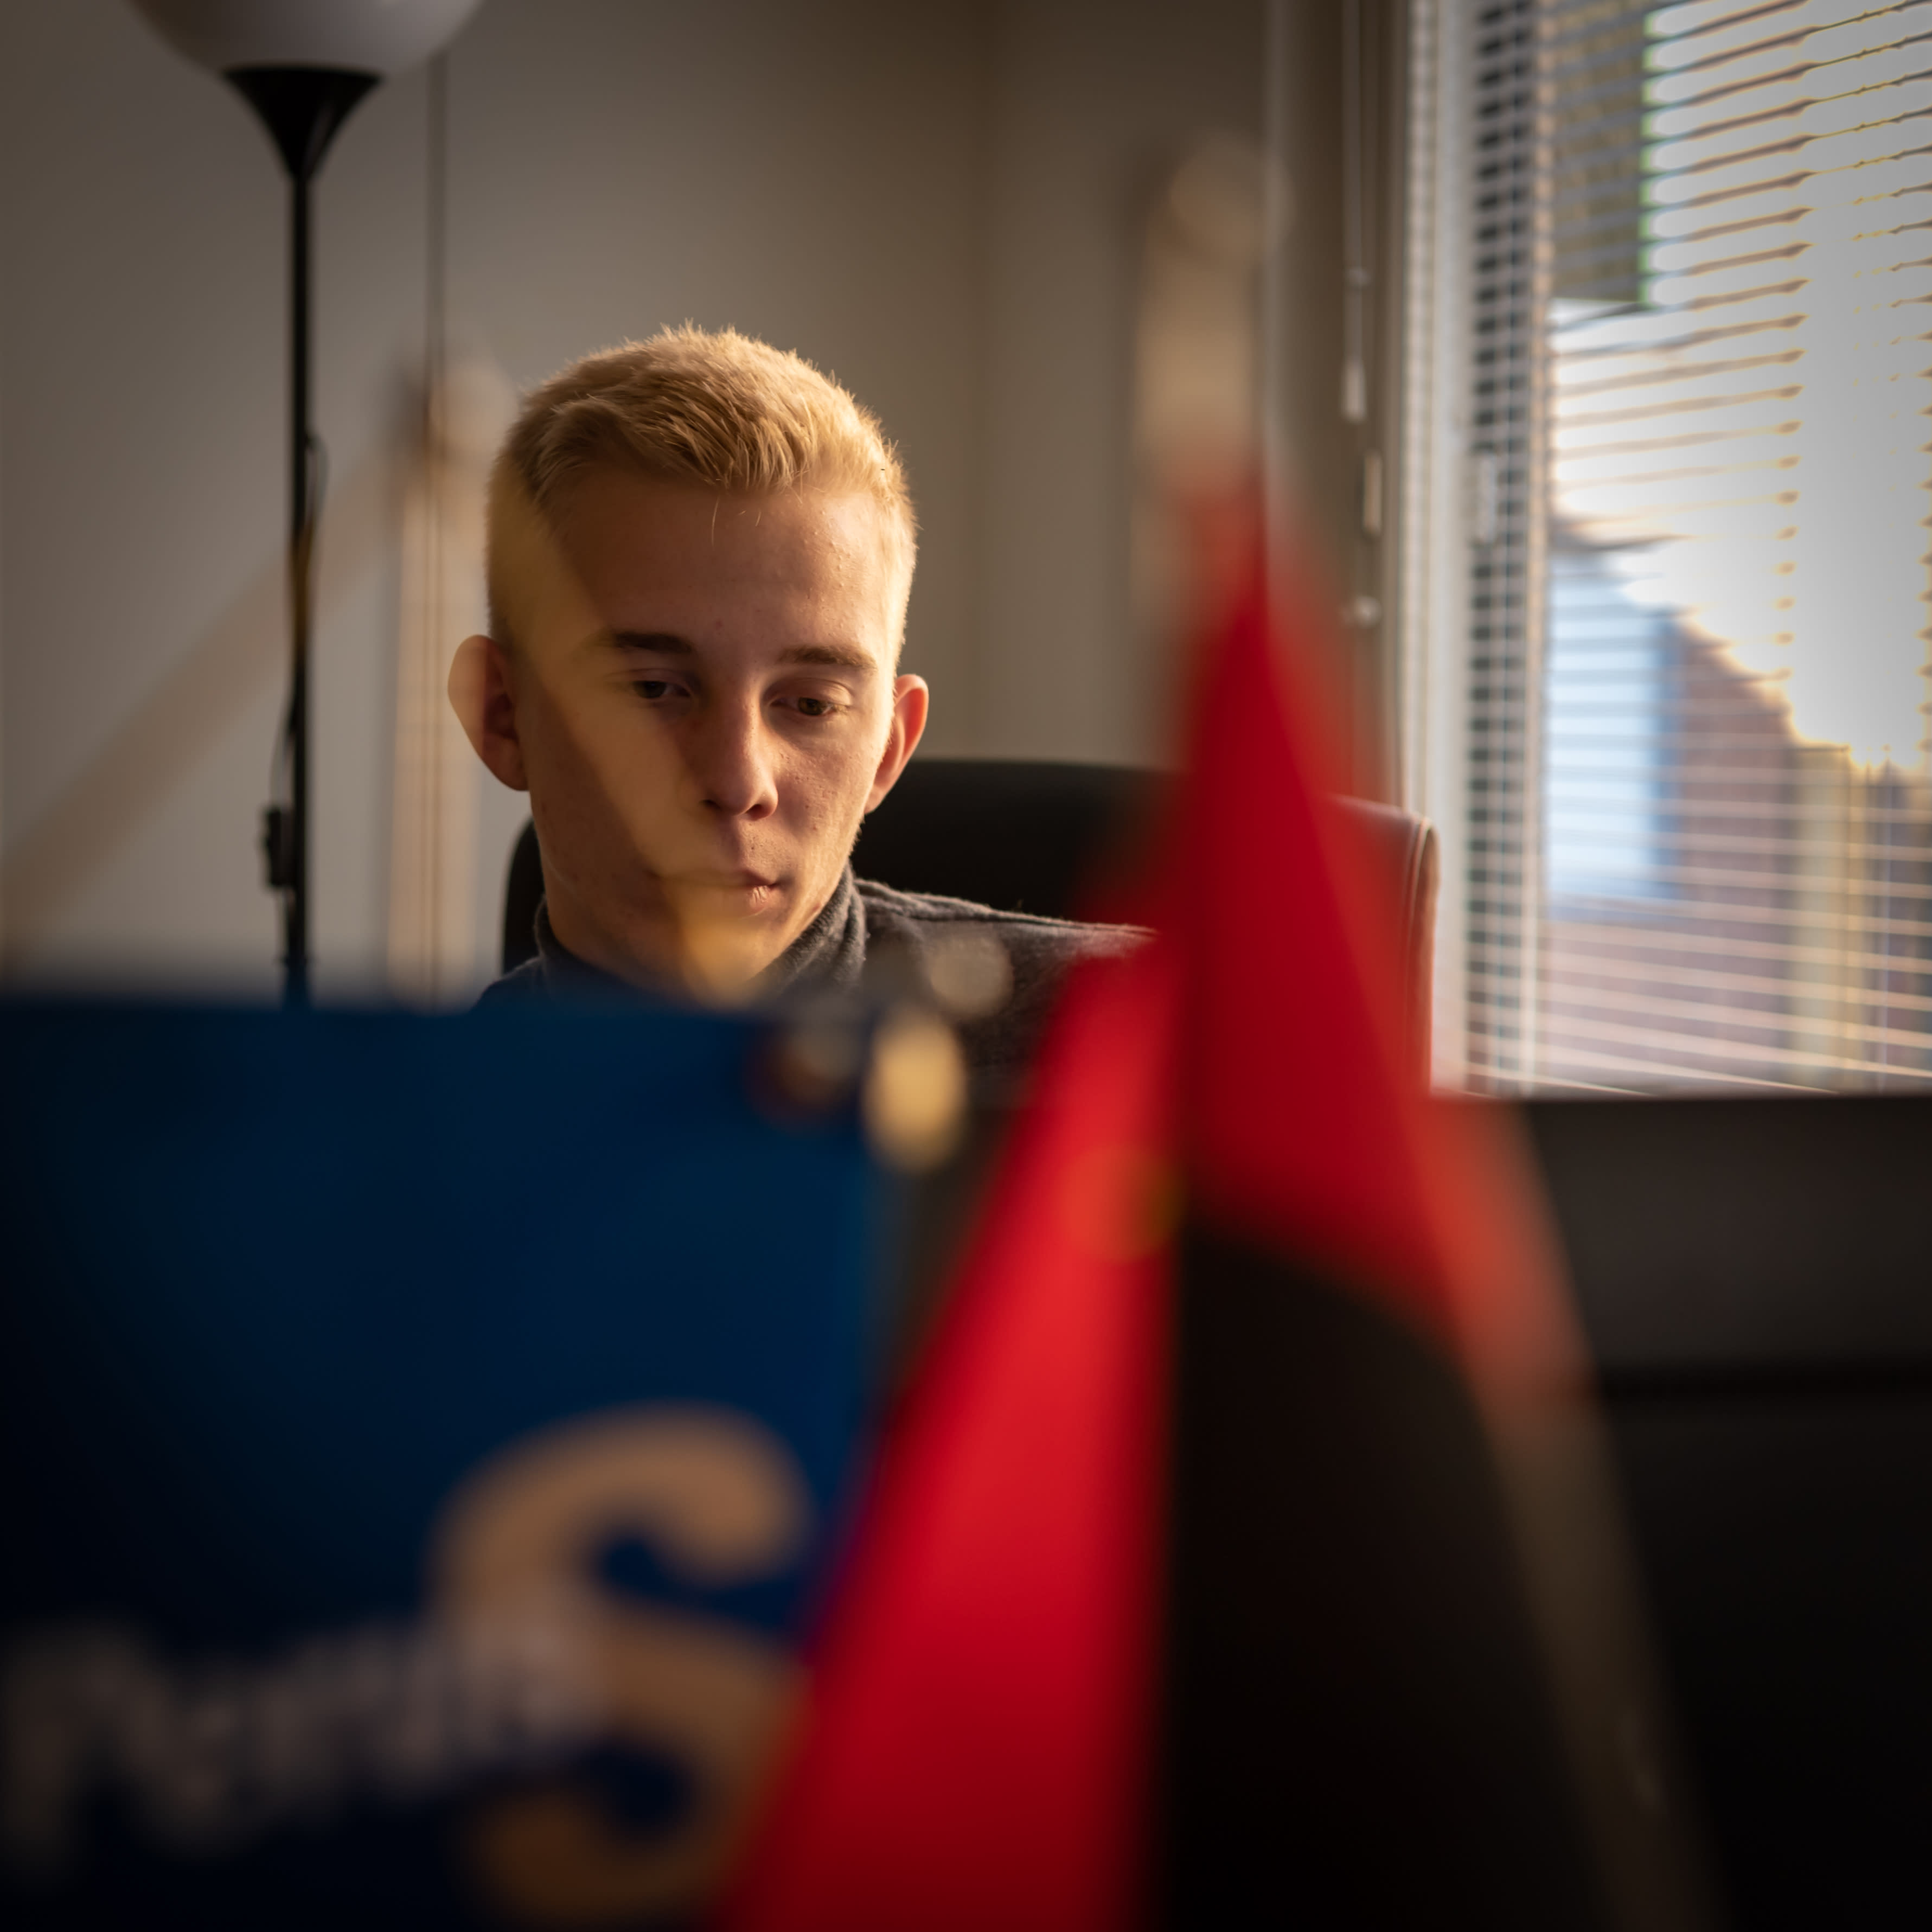 No state funding for the youth wing of the Finnish Party for the third year